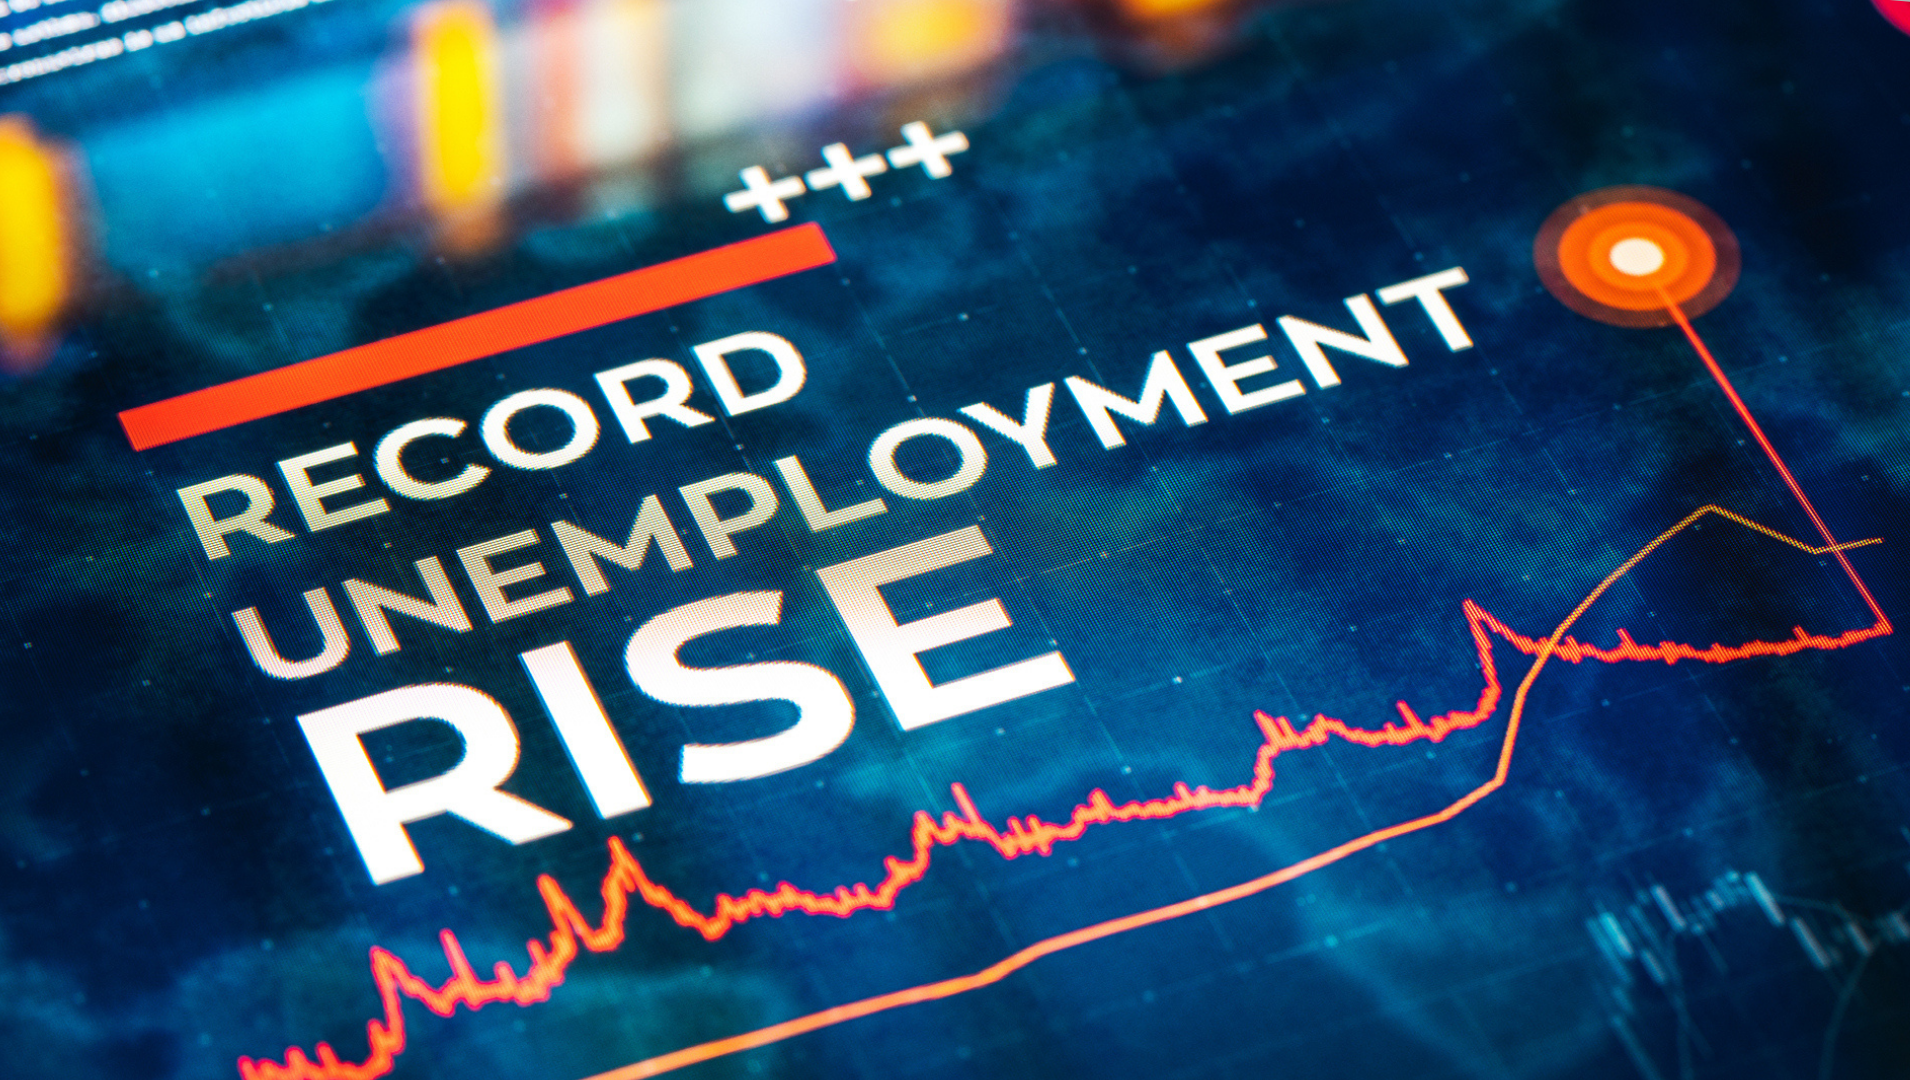 A TV screen depicting the words "record unemployment rise"